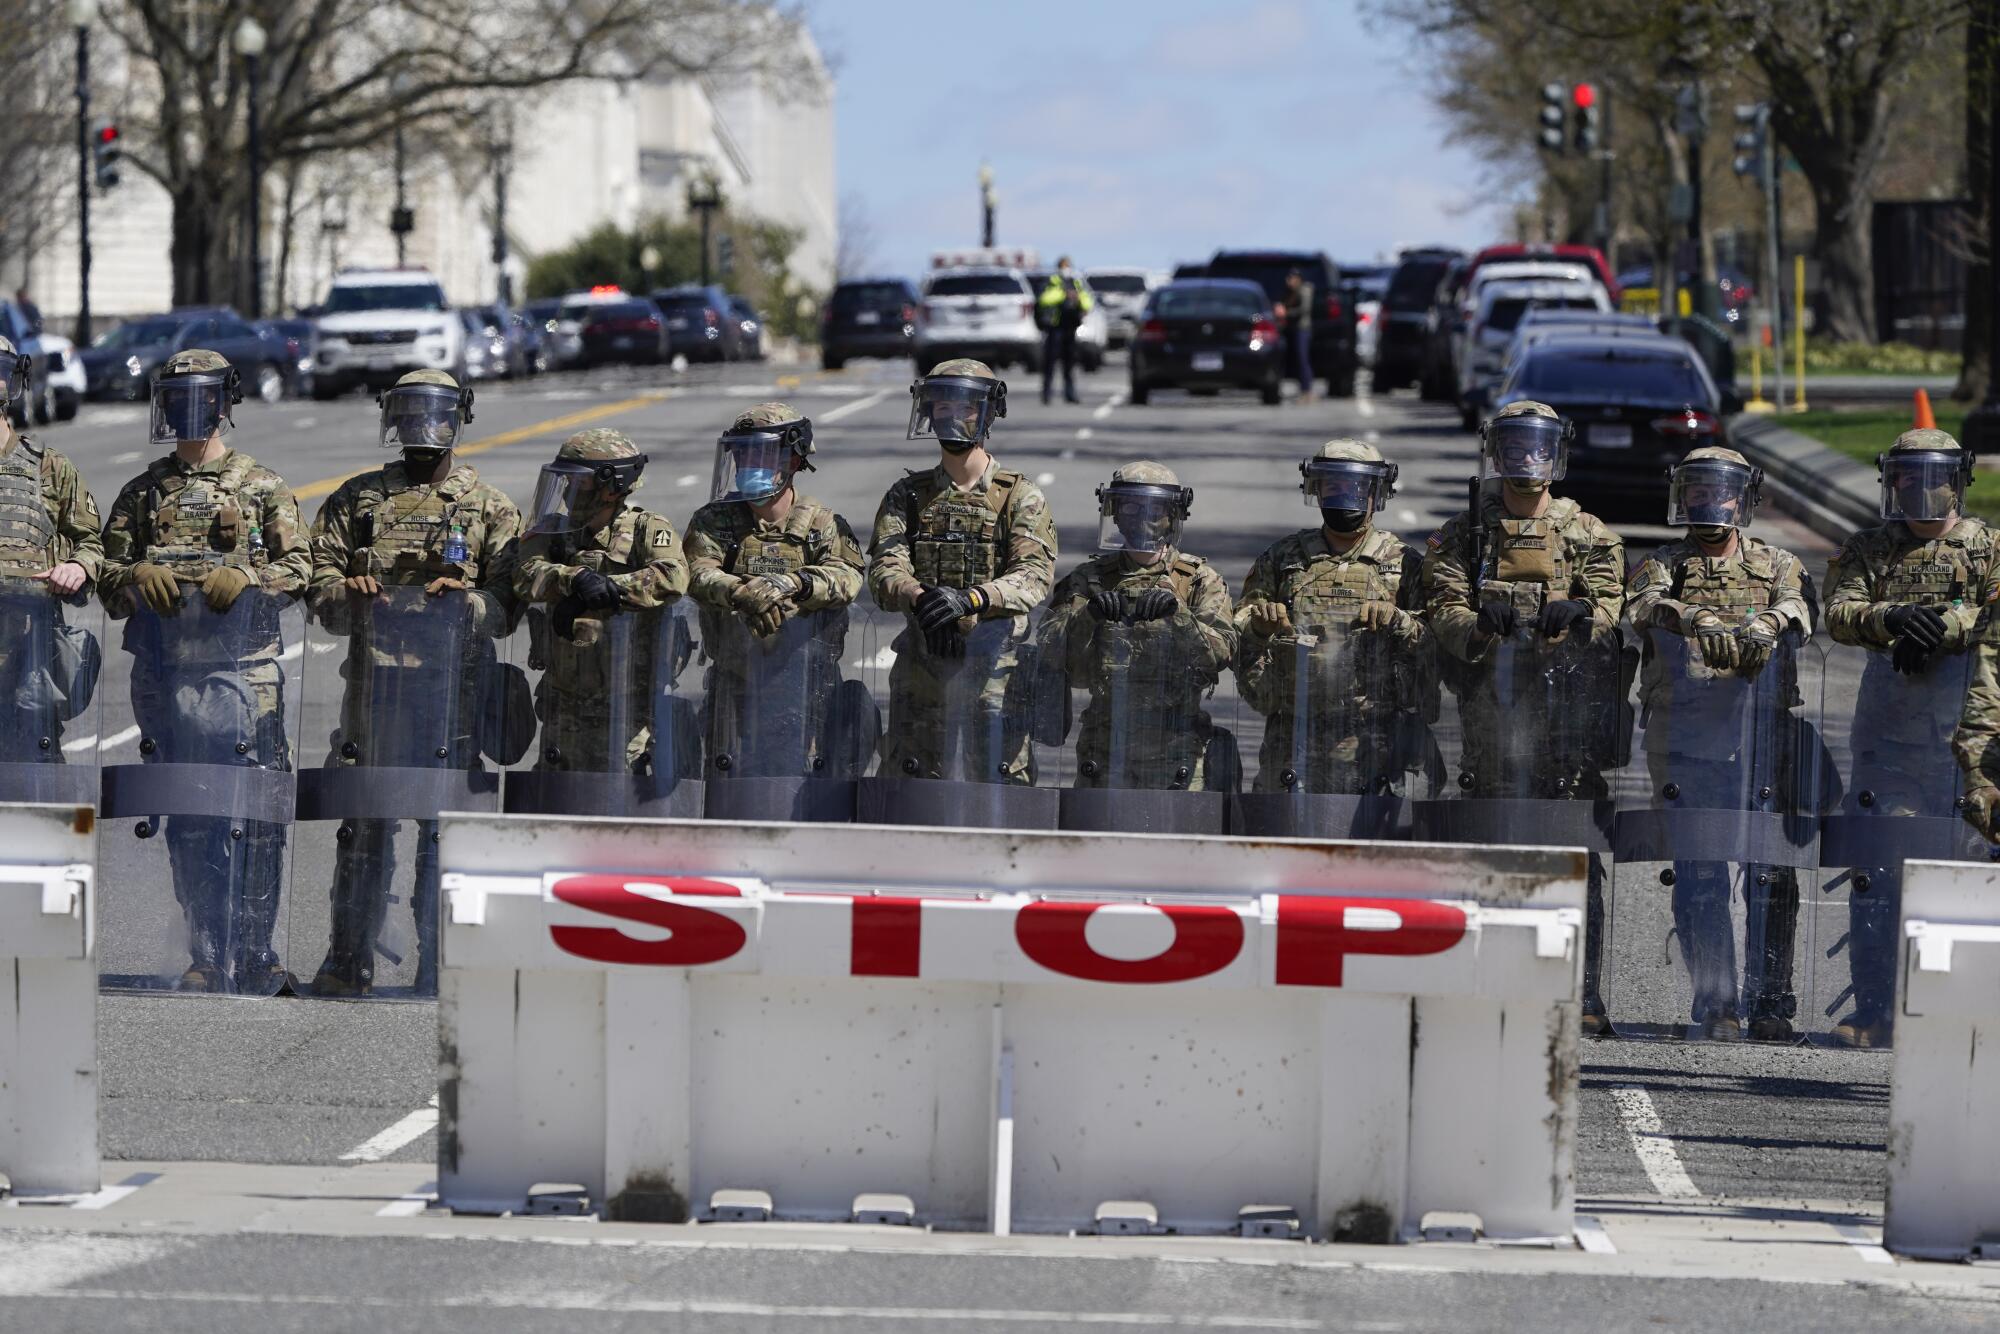 Troops stand guard near the scene.